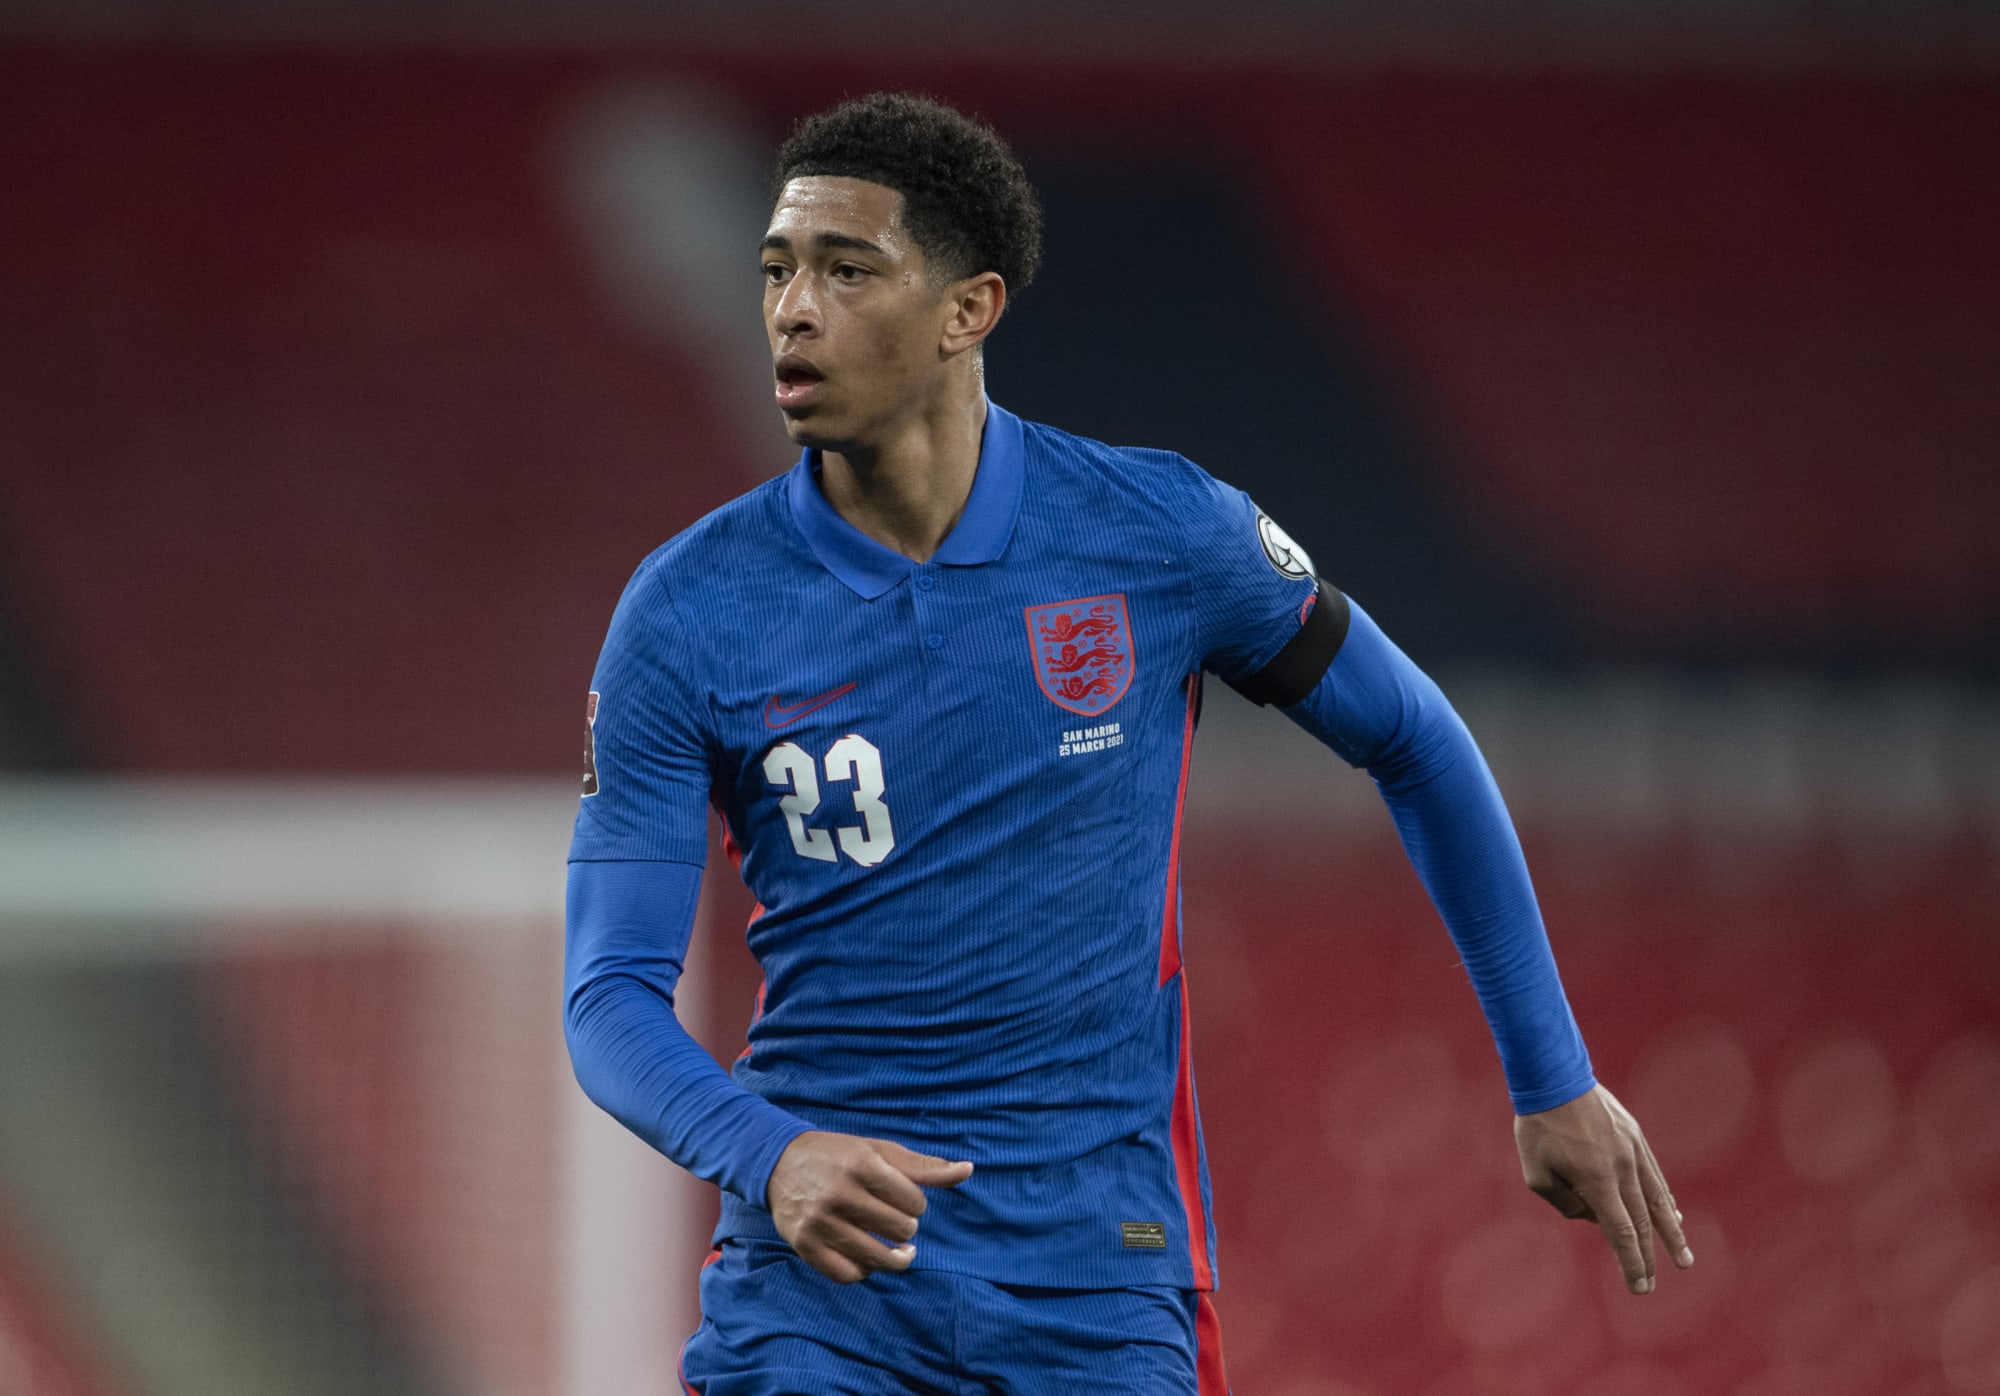 Jadon Sancho and Jude Bellingham named in England's Euro 2020 squad